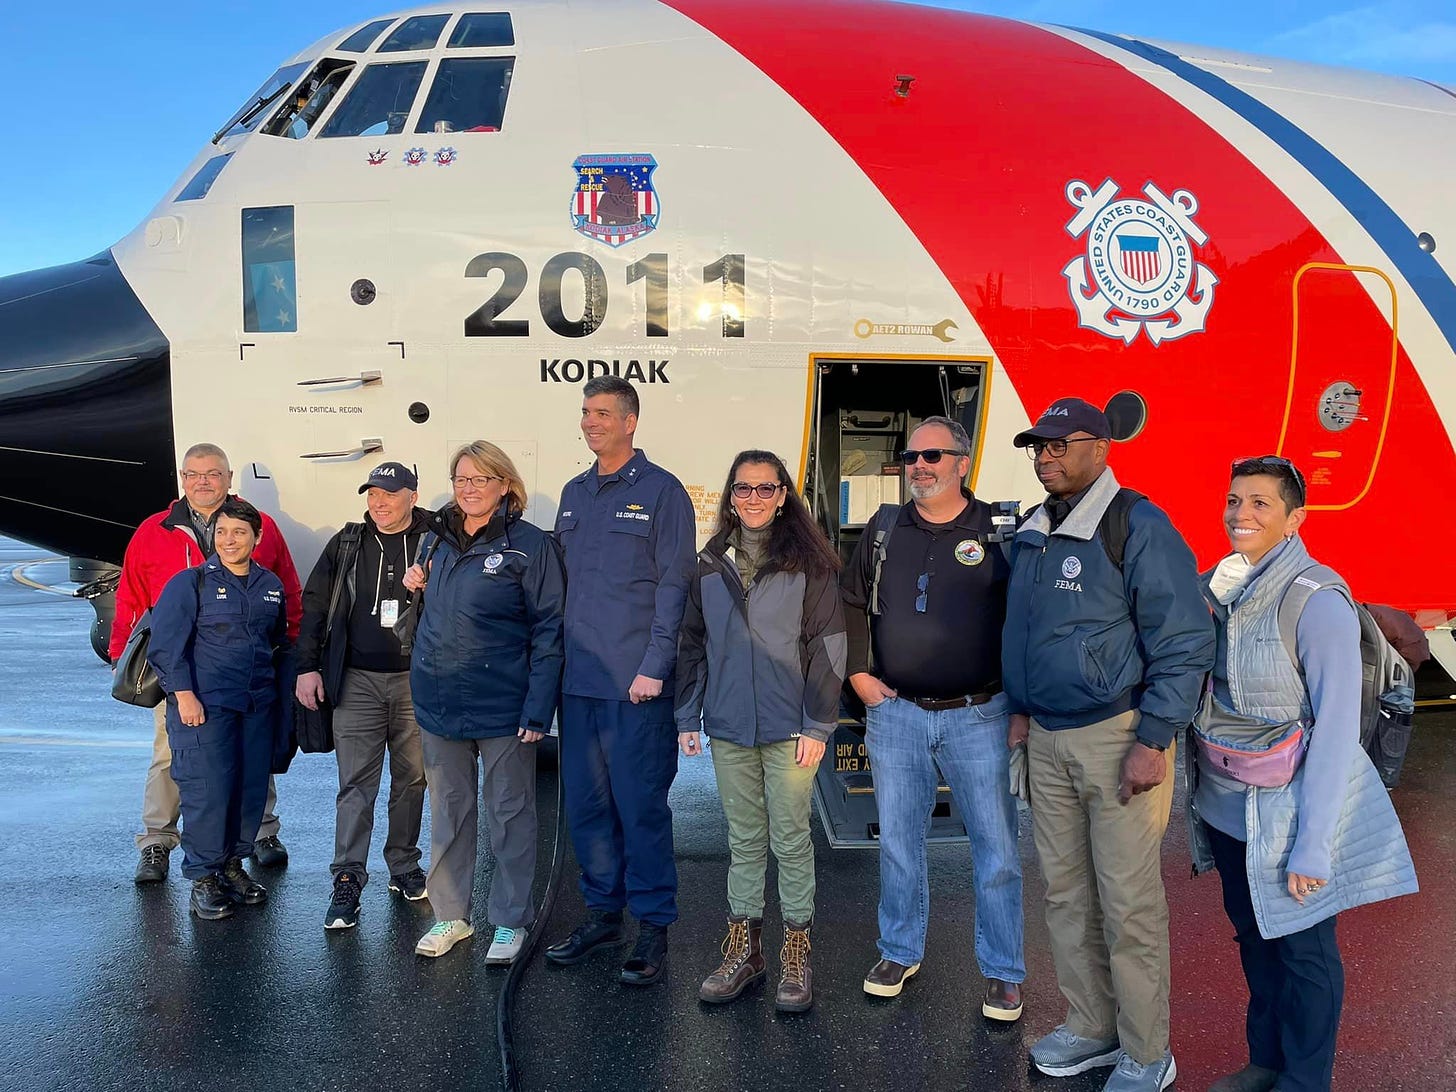 Rep. Peltola and a group of people stand in front of a Coast Guard airplane.